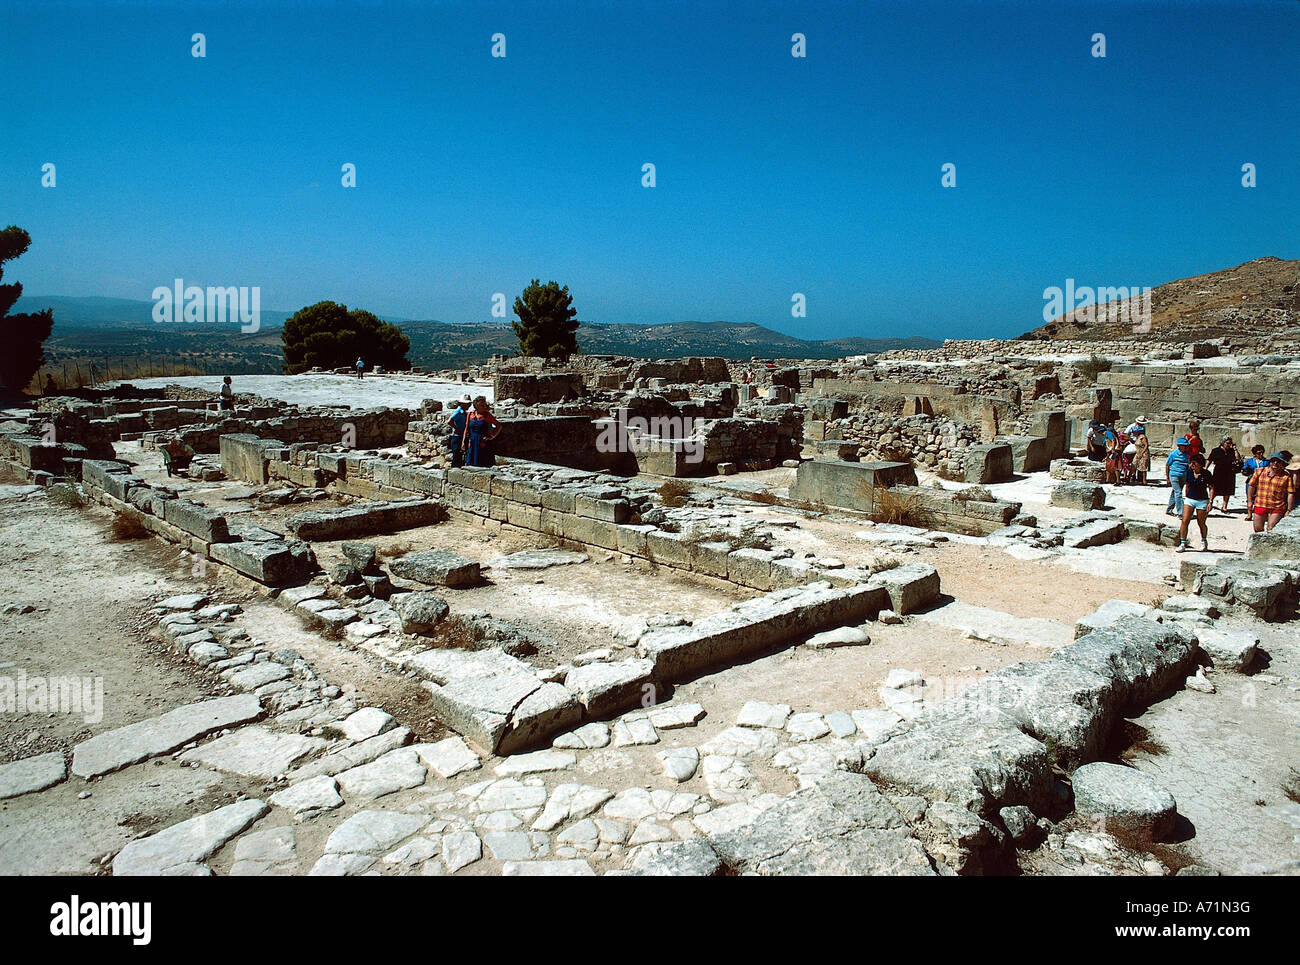 geography / travel, Greece, Crete, Phaistos, Minoan palace area, 20th - 14th century BC, new palace, built around 1600 BC, ruin, Phaestos, Phaestus, Festos, built shortly after 2000 BC, destroyed by fire, new building burned down approx. 1650 BC, antiquity, excavations, archaeology, tourists, historical, Minoans, twentieth, fourteenth, , Stock Photo